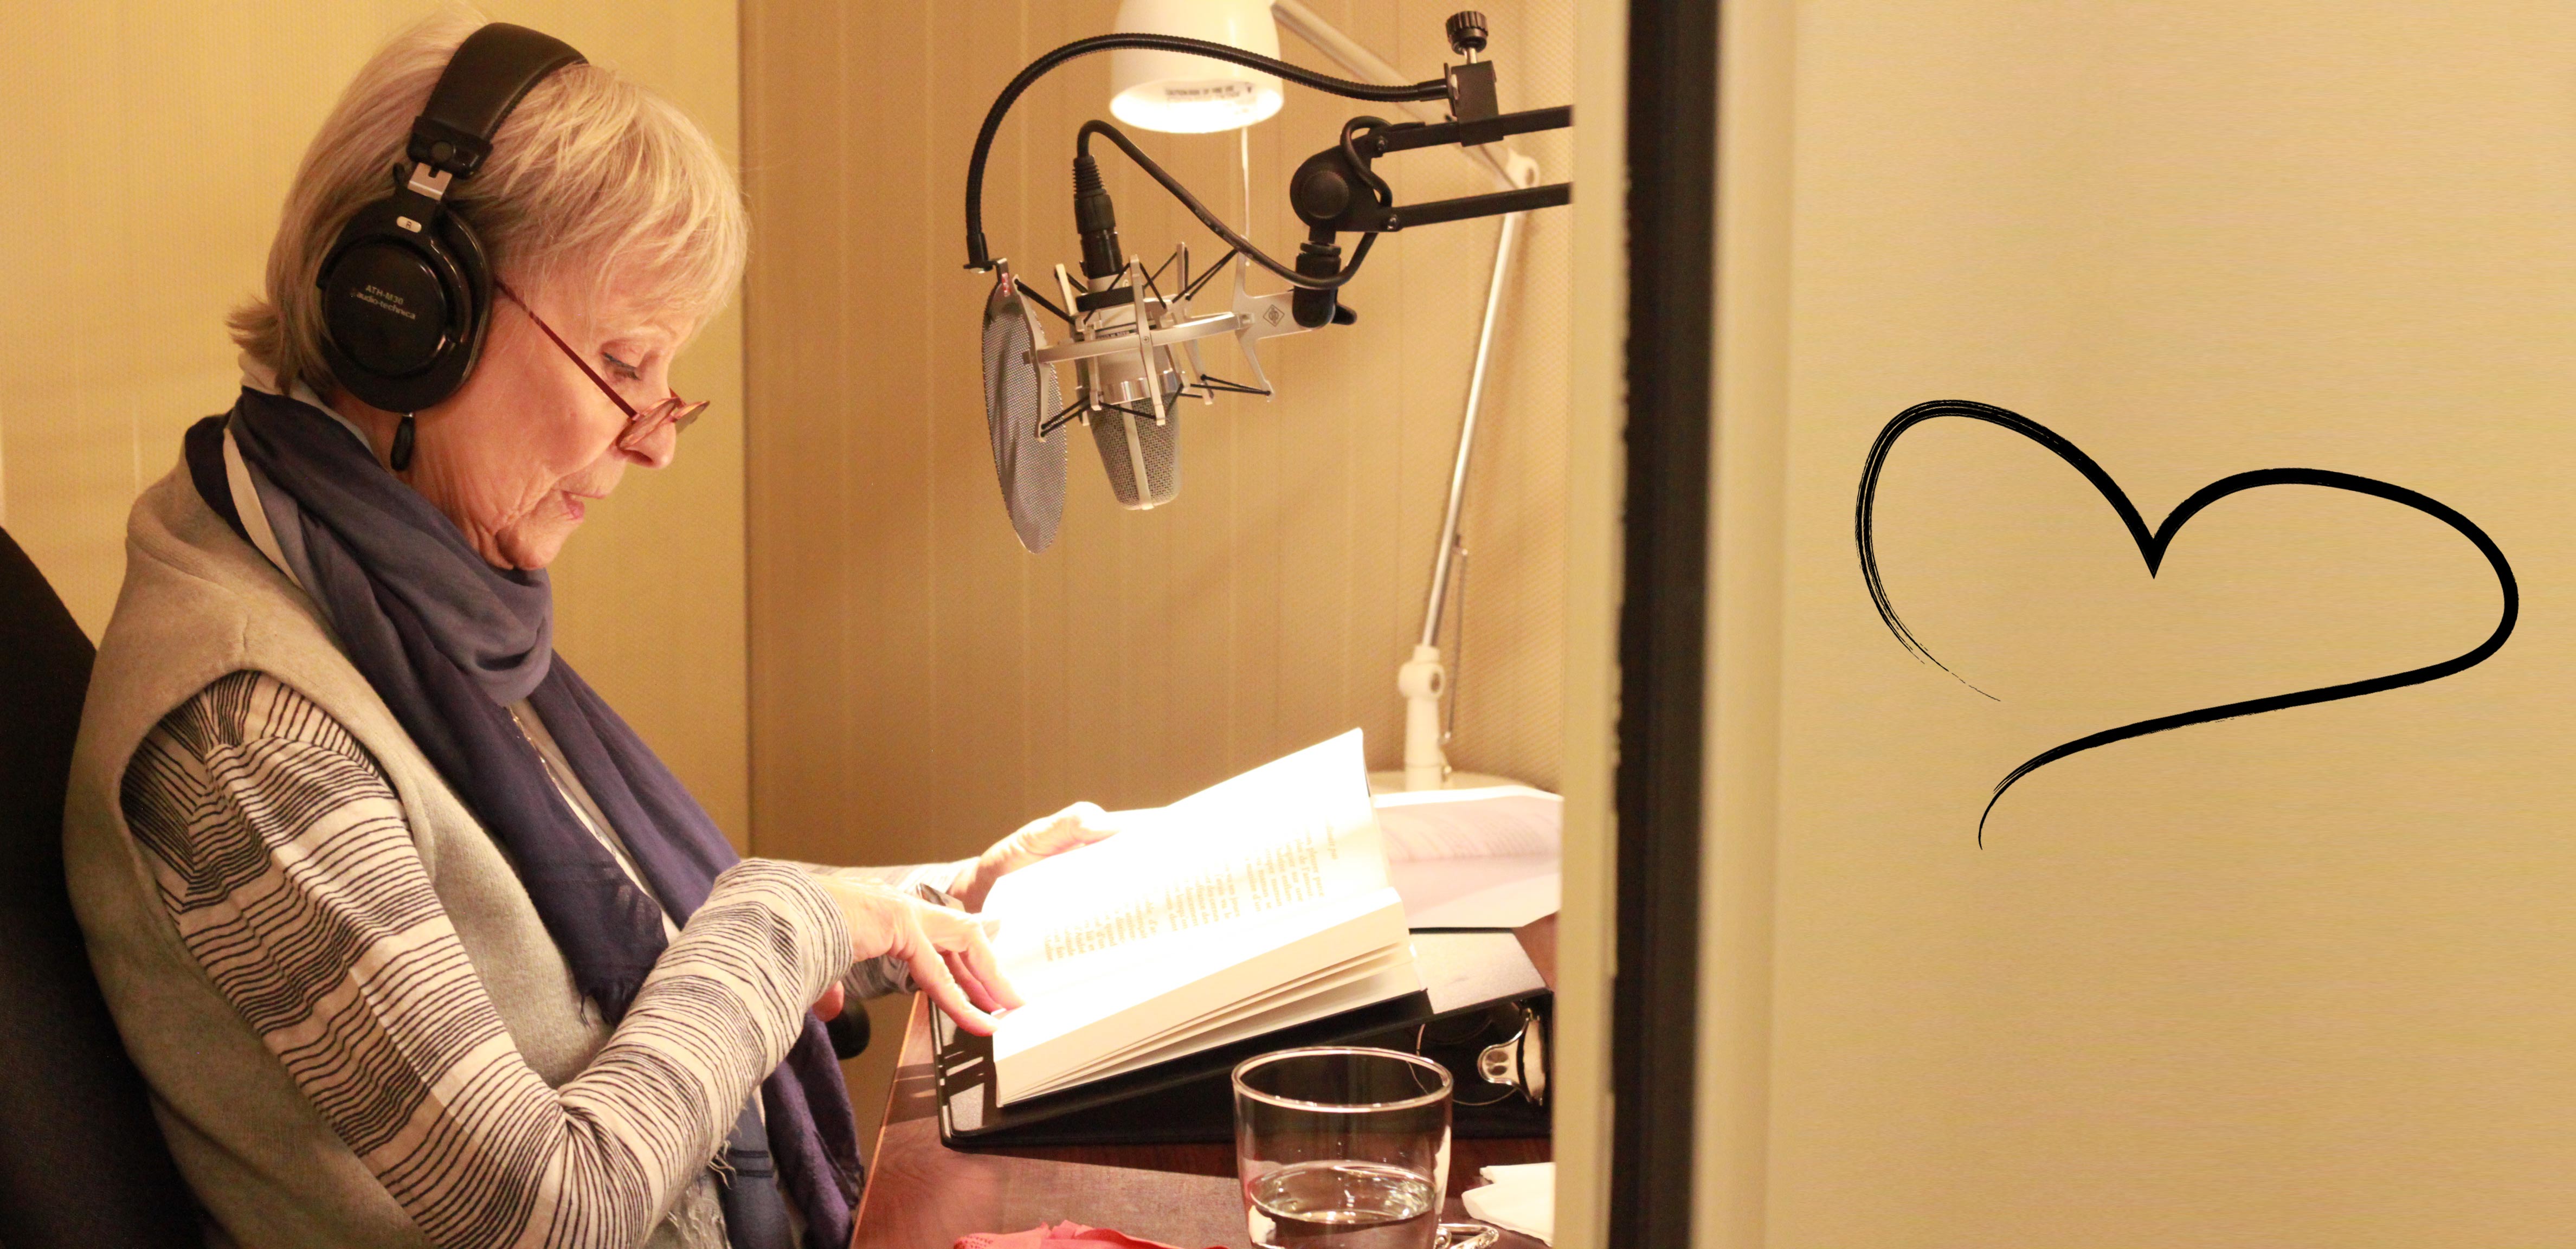 Celine Garneau, reading from a book in one of CNIB’s recording studios. A heart graphic can be seen on the wall in the right side of the picture